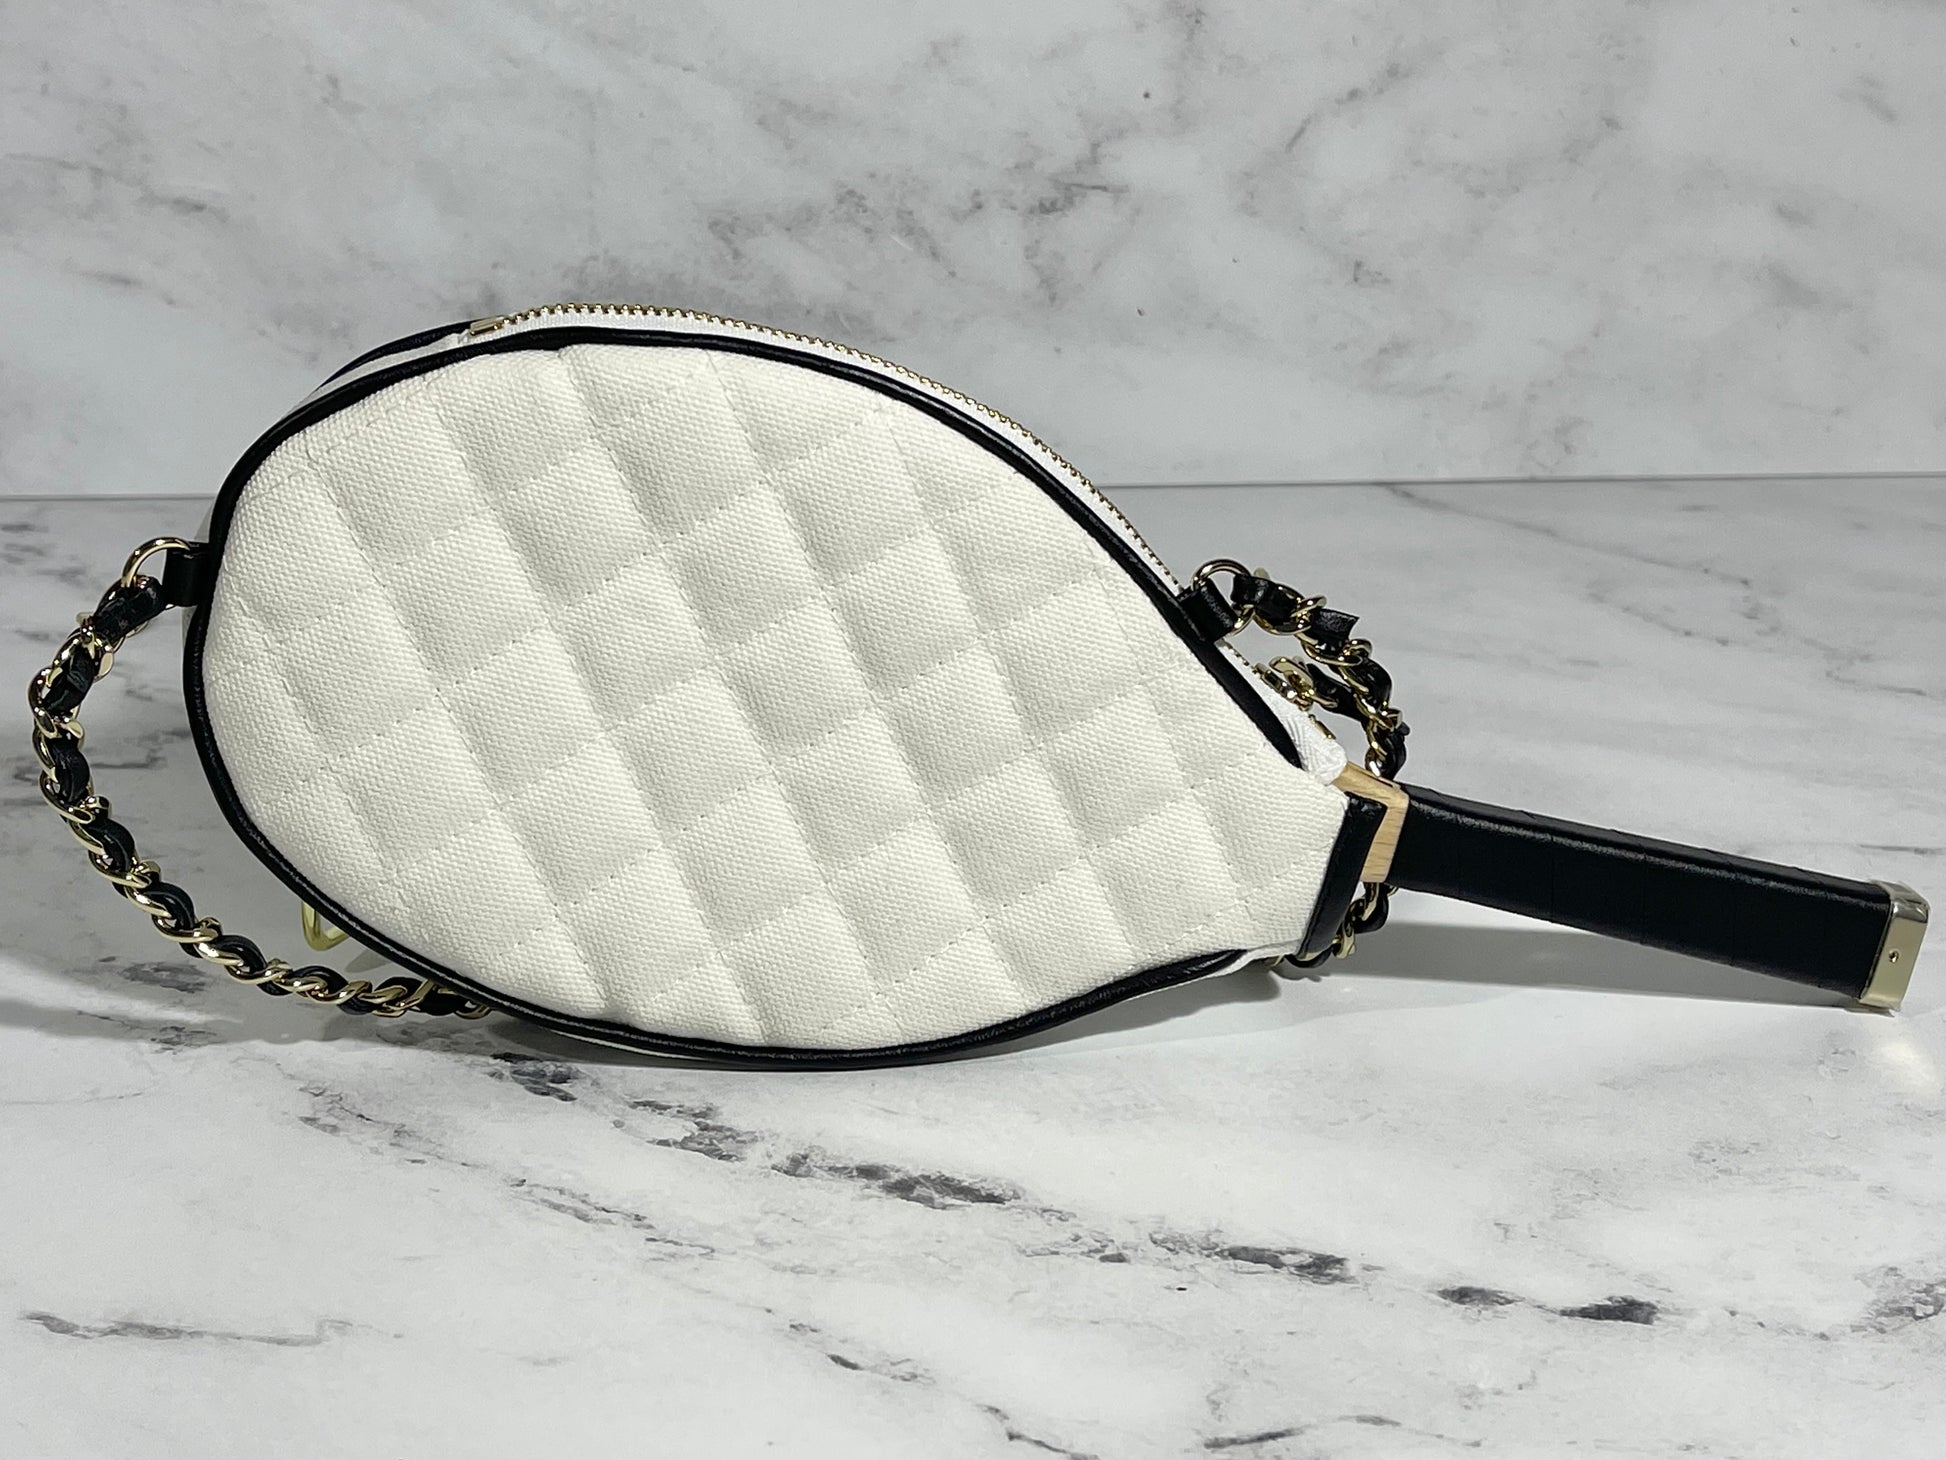 Newest Limited Edition Chanel Tennis Bag #chanel #channelclassic #cha